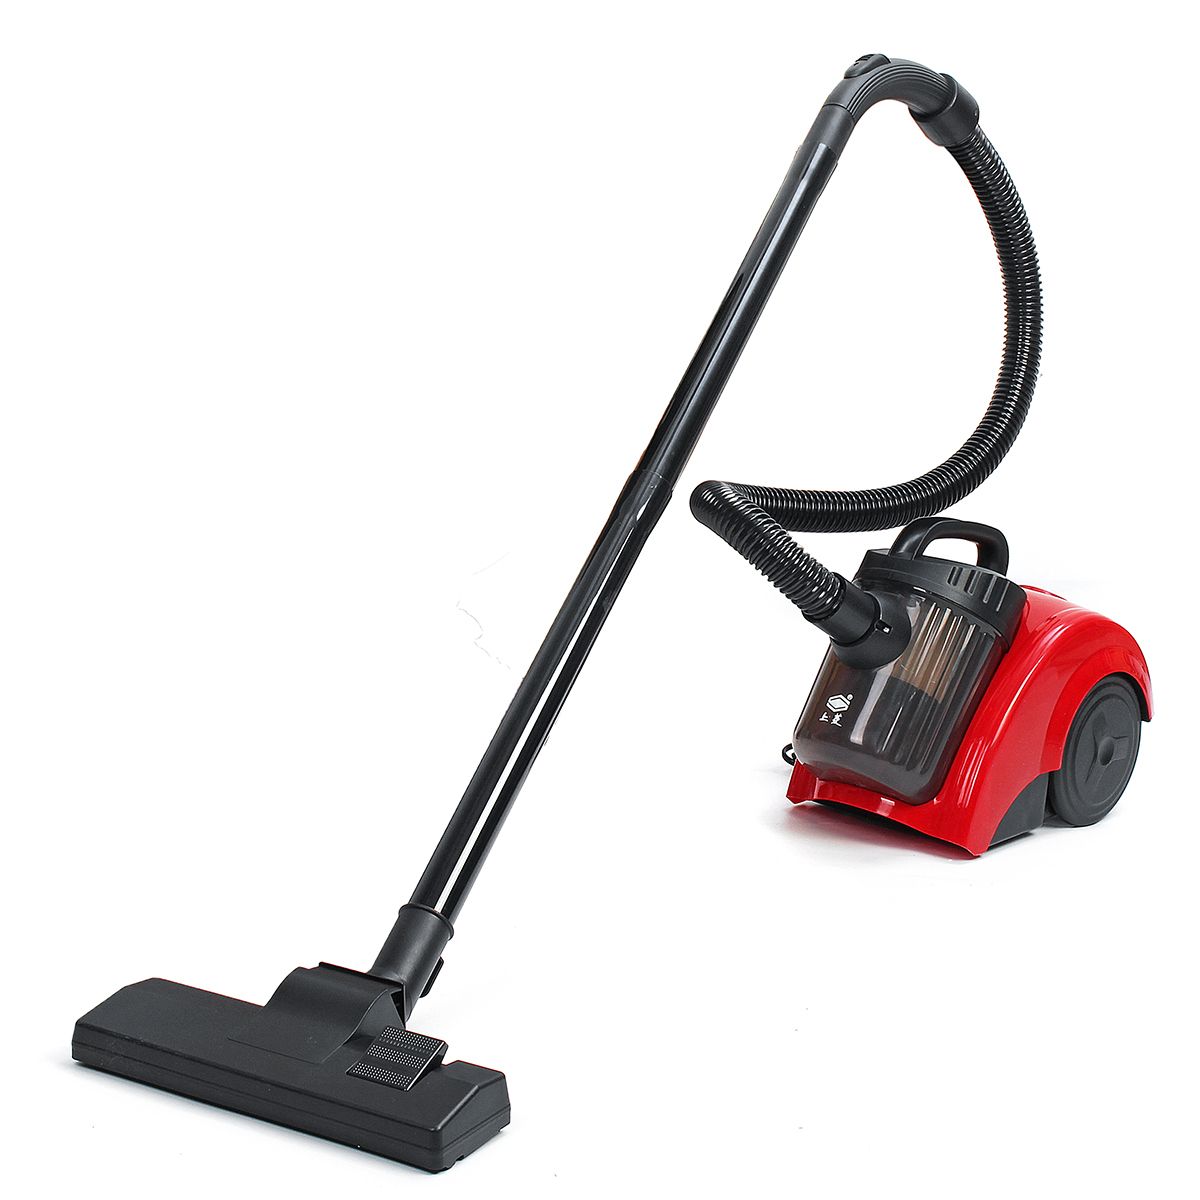 220V-1000W-Handheld-Vacuum-Cleaner-Red-Portable-Filter-Carpet-Dust-Collector-Carpet-Sweep-Home-1564818